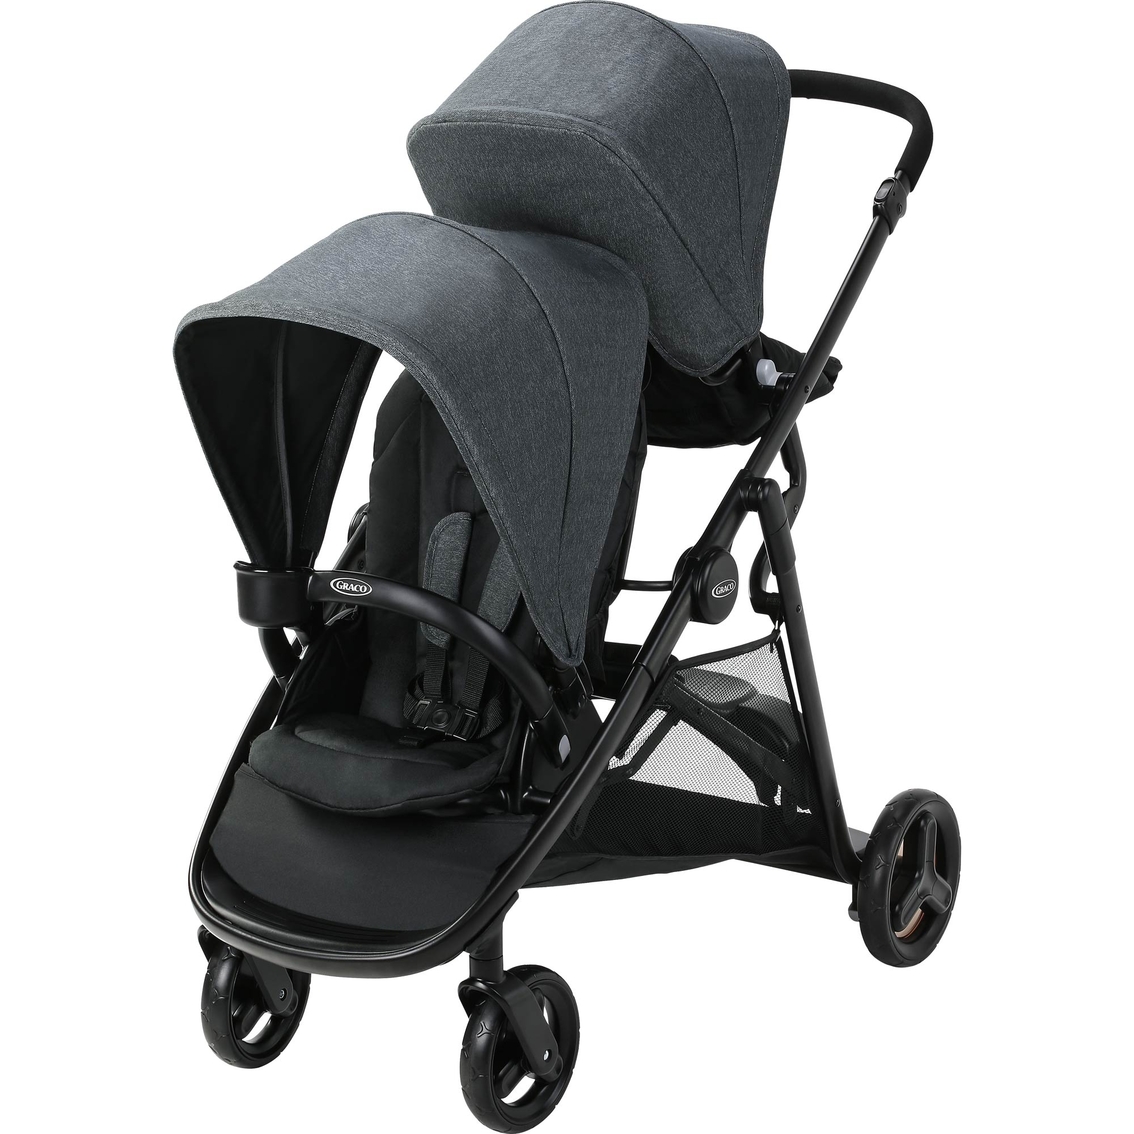 Graco Ready2Grow 2.0 Double Stroller - Image 1 of 2